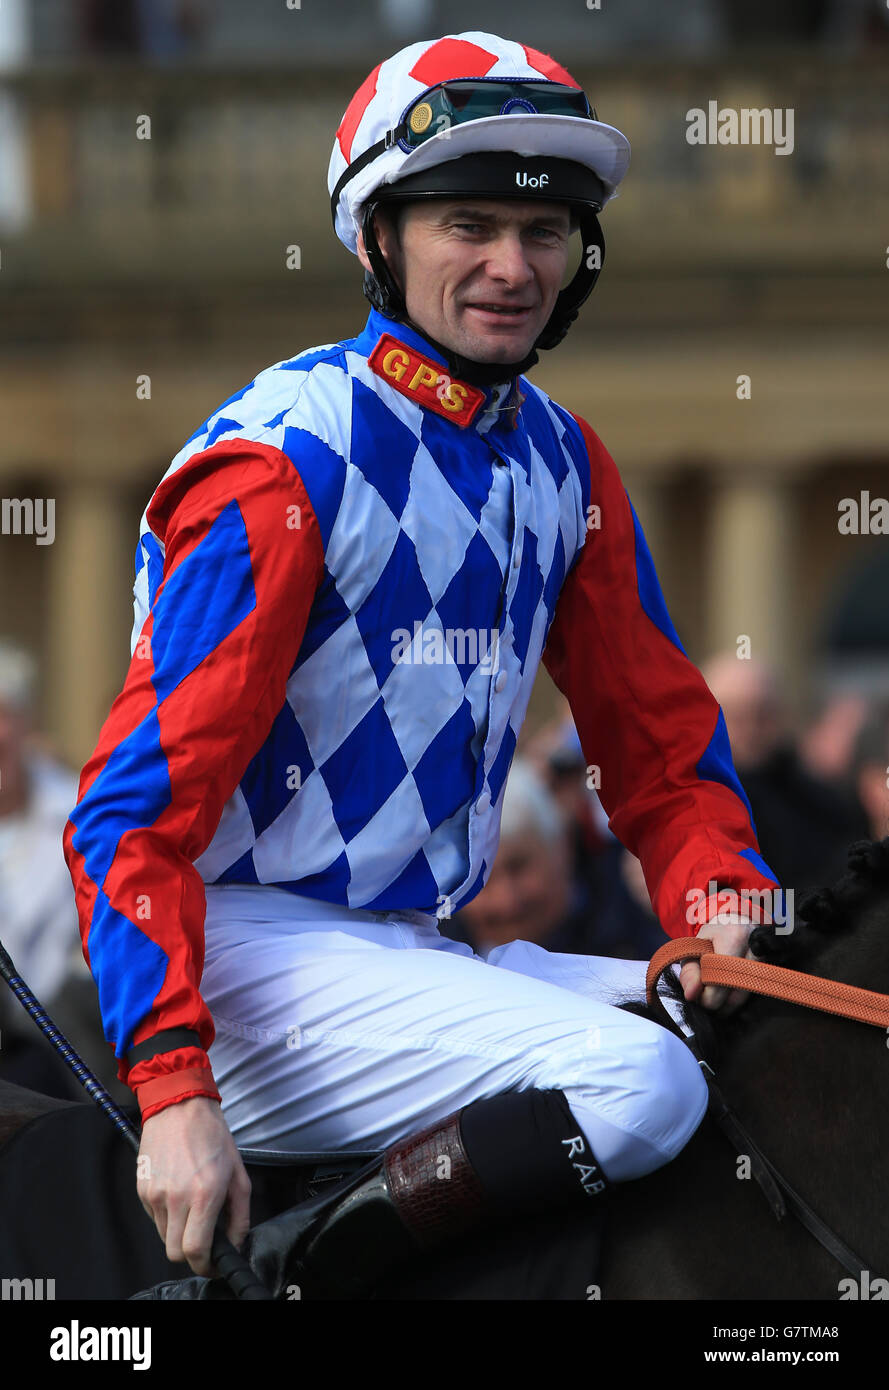 Jockey Robert Havlin at Doncaster Racecourse. PRESS ASSOCIATION Photo. Picture date Saturday March 28, 2015. See PA Story RACING Doncaster. Photo credit should rad: Nick Potts/PA Wire. Stock Photo